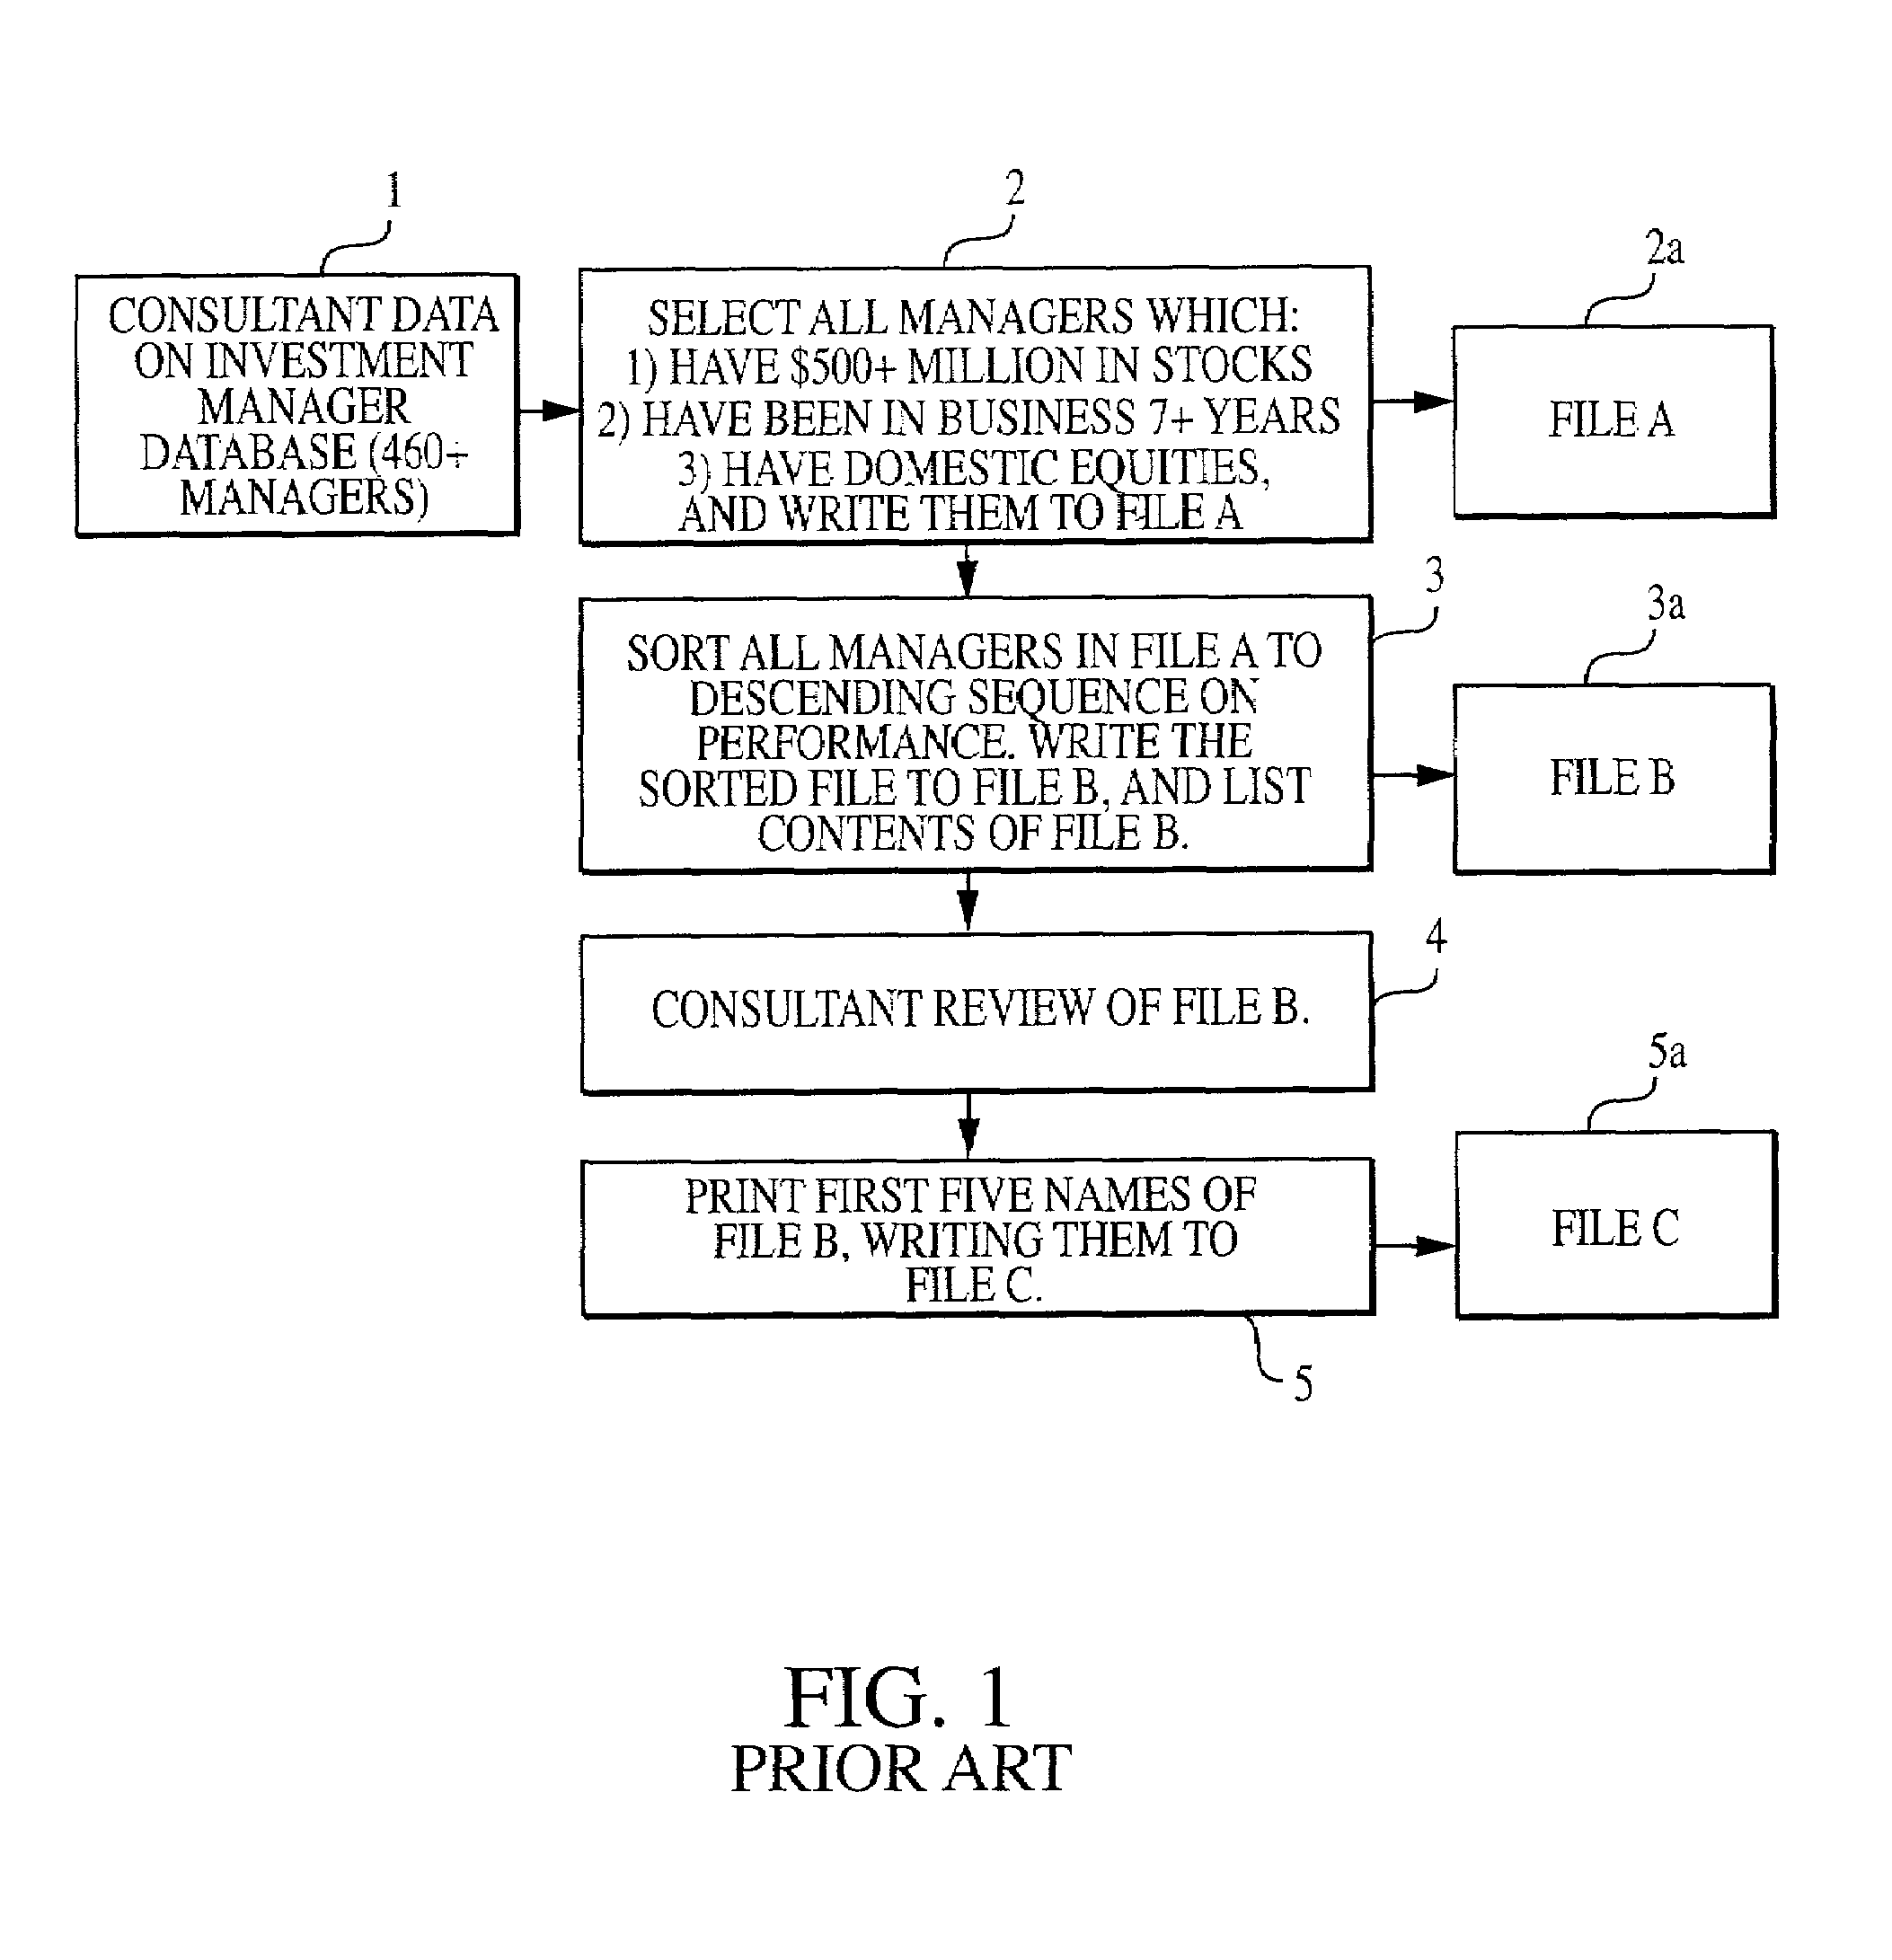 System, method and computer readable medium containing instructions for evaluating and disseminating securities analyst performance information